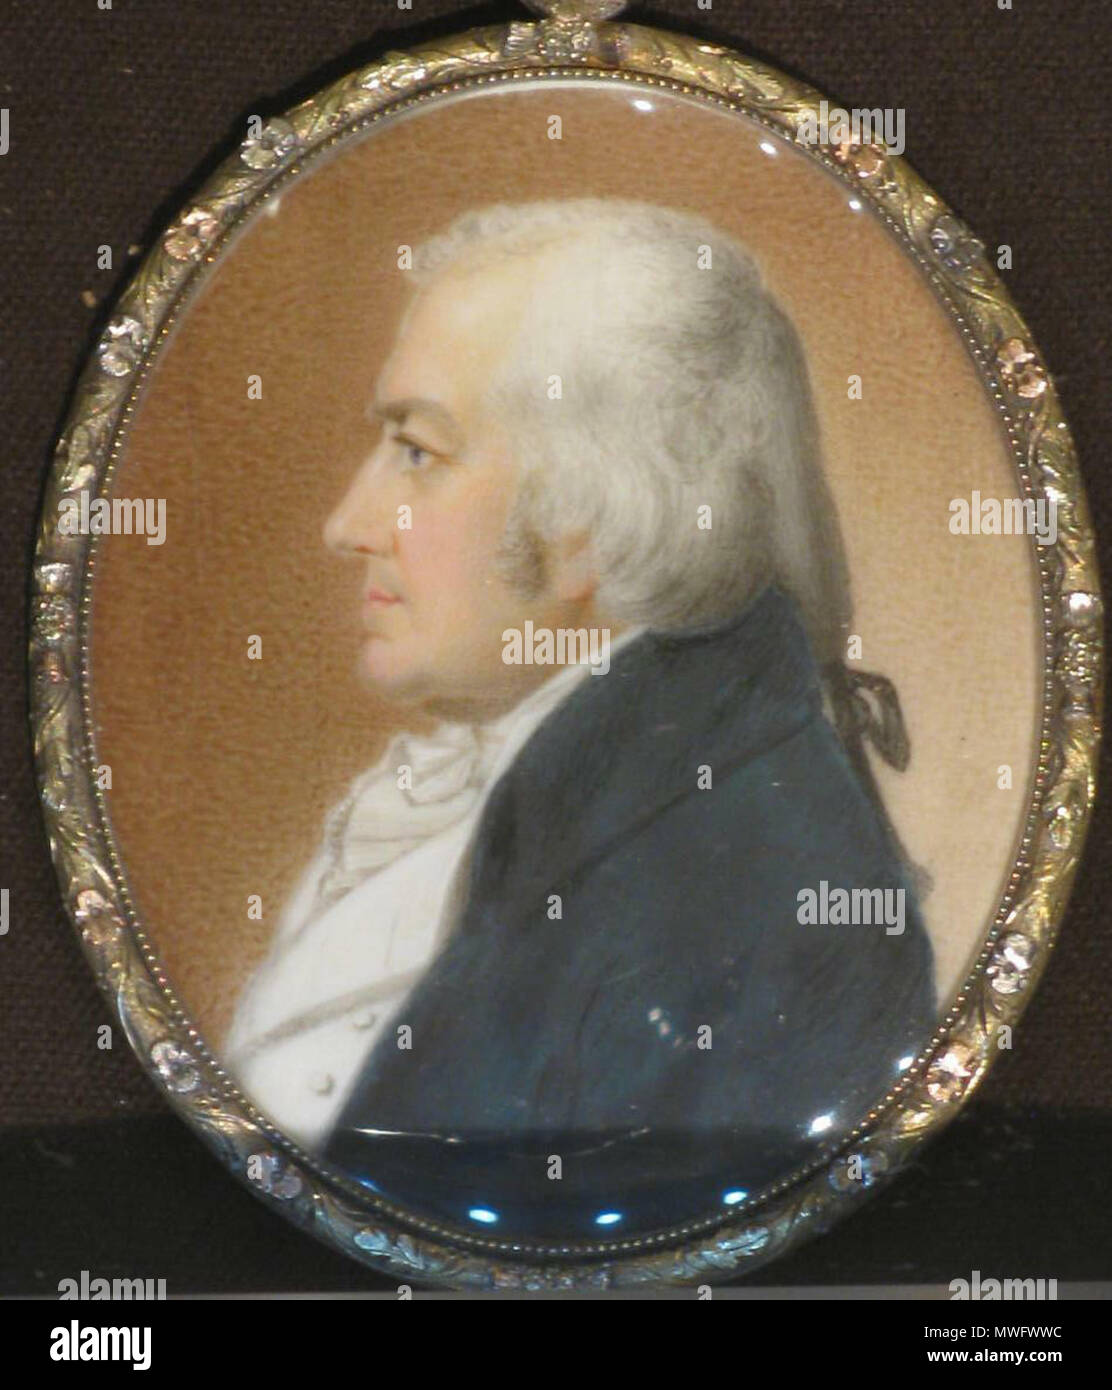 . John Beale Bordley 1821 Joseph Robinson watercolor on ivory image (oval): 2 7/8 x 2 1/4 in. (7.3 x 5.9 cm) Smithsonian American Art Museum Bequest of Mary Elizabeth Spencer 1999.27.42 Smithsonian American Art Museum 3rd Floor, Luce Foundation Center . 1 March 2009, 16:47:48. pohick2 320 John Beale Bordley 1999.27.42 Stock Photo